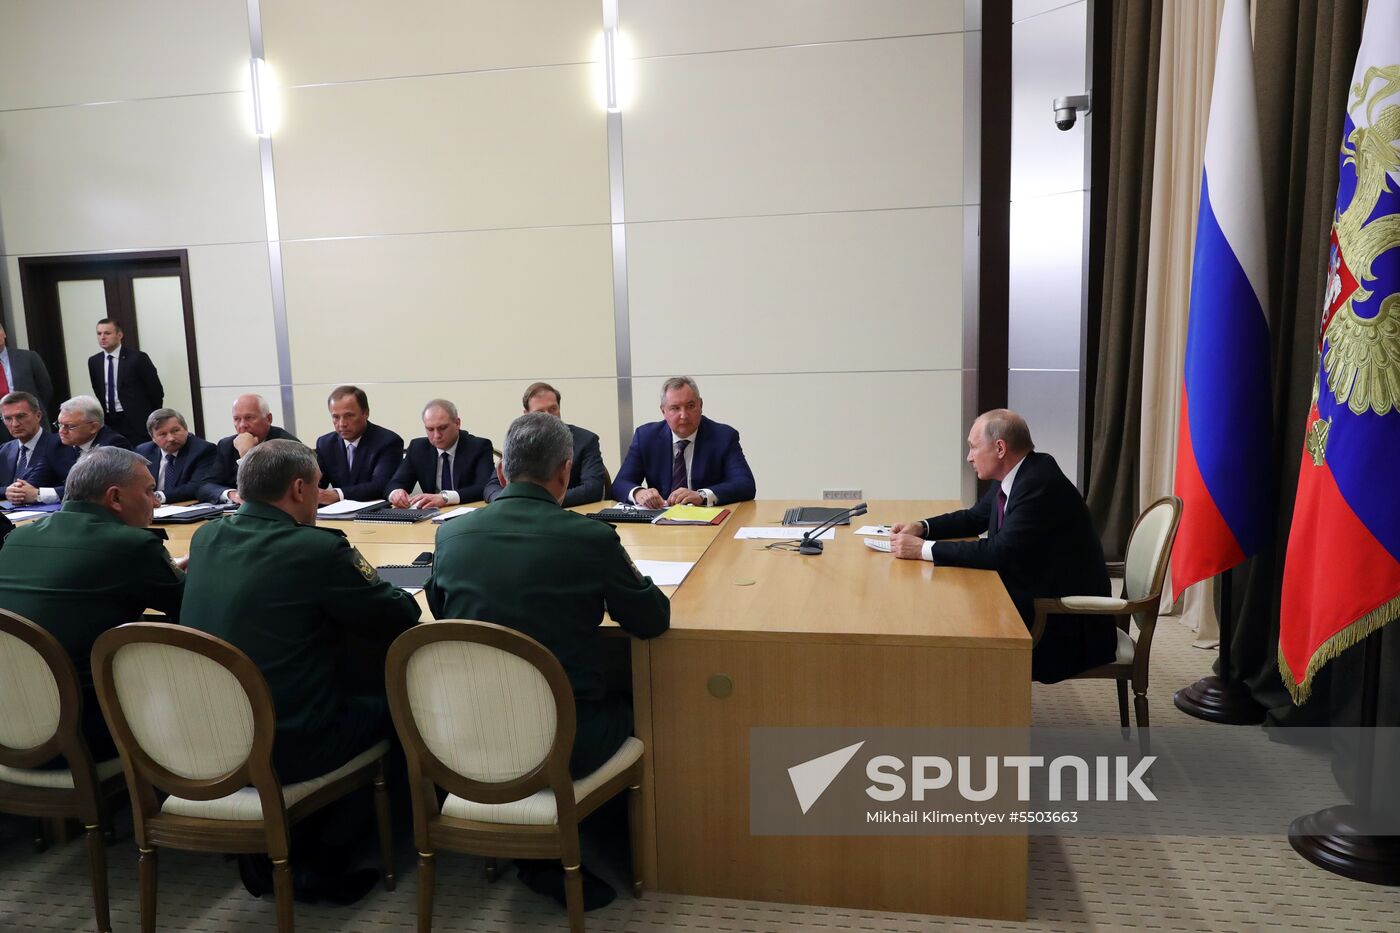 President Vladimir Putin holds meeting with officials of Defense Ministry and defense industry